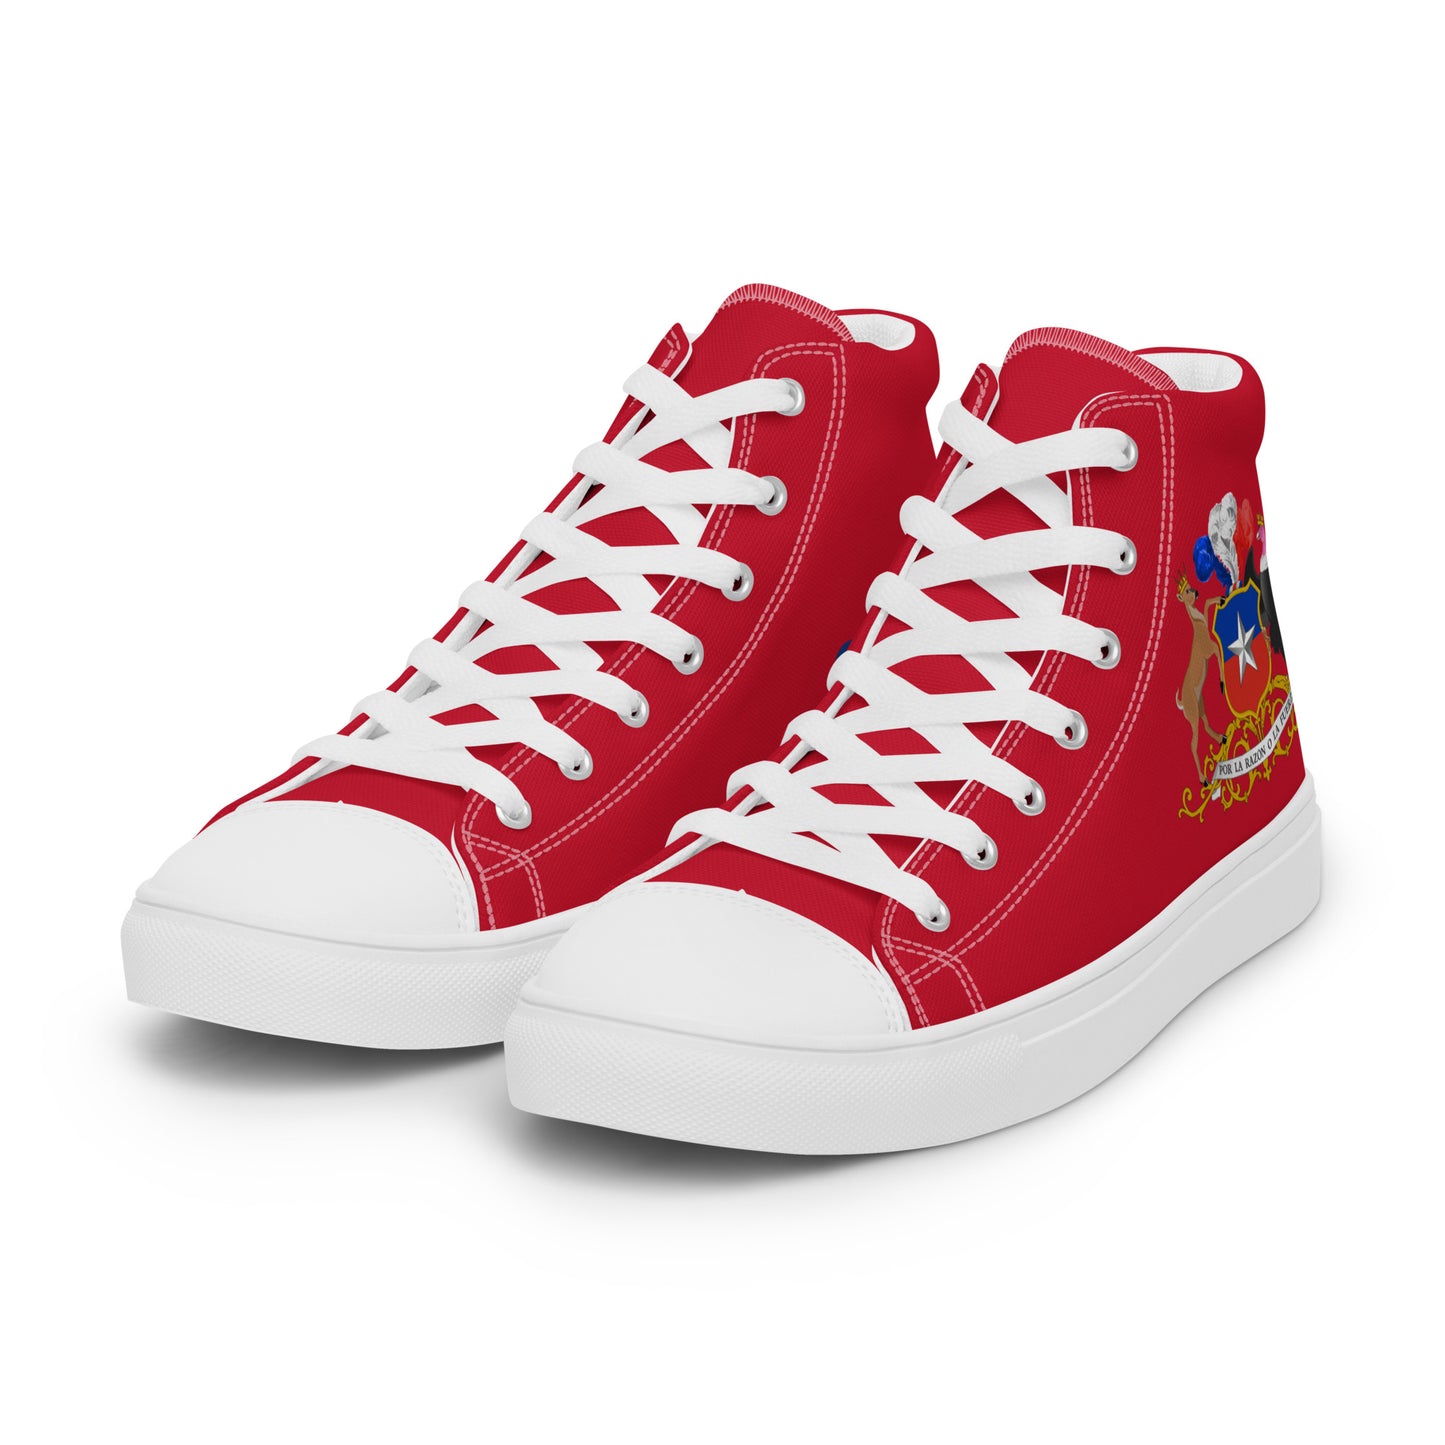 Chile - Women - Red - High top shoes